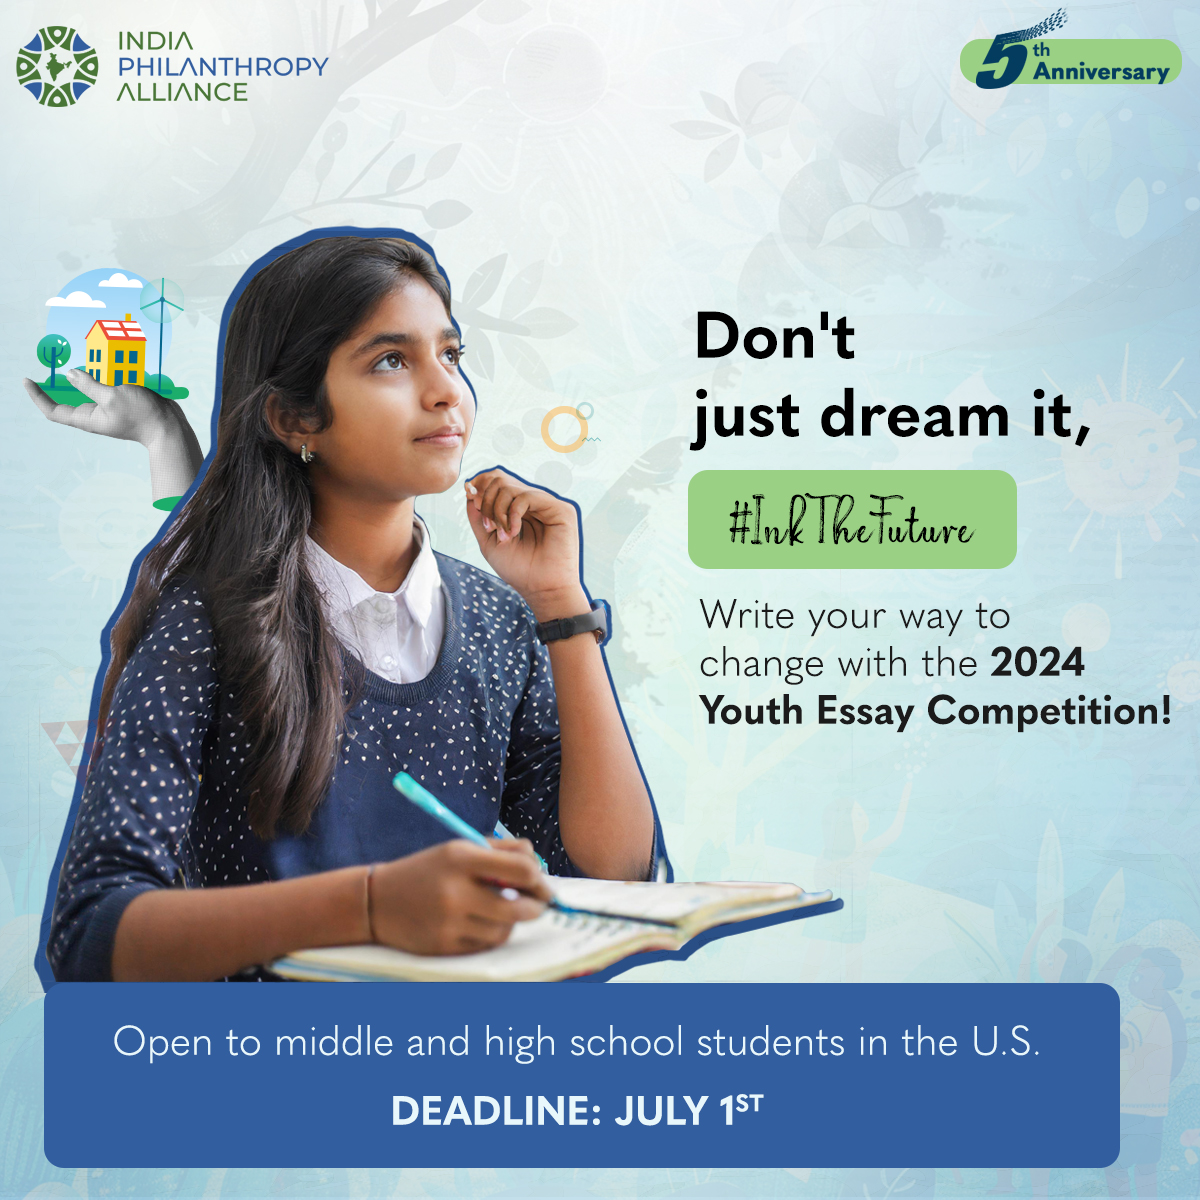 We're searching for young minds brimming with innovative ideas to address critical issues facing India's development. Craft a powerful essay that explores a pressing challenge and proposes creative solutions, and submit it before July 1st to #InkTheFuture -